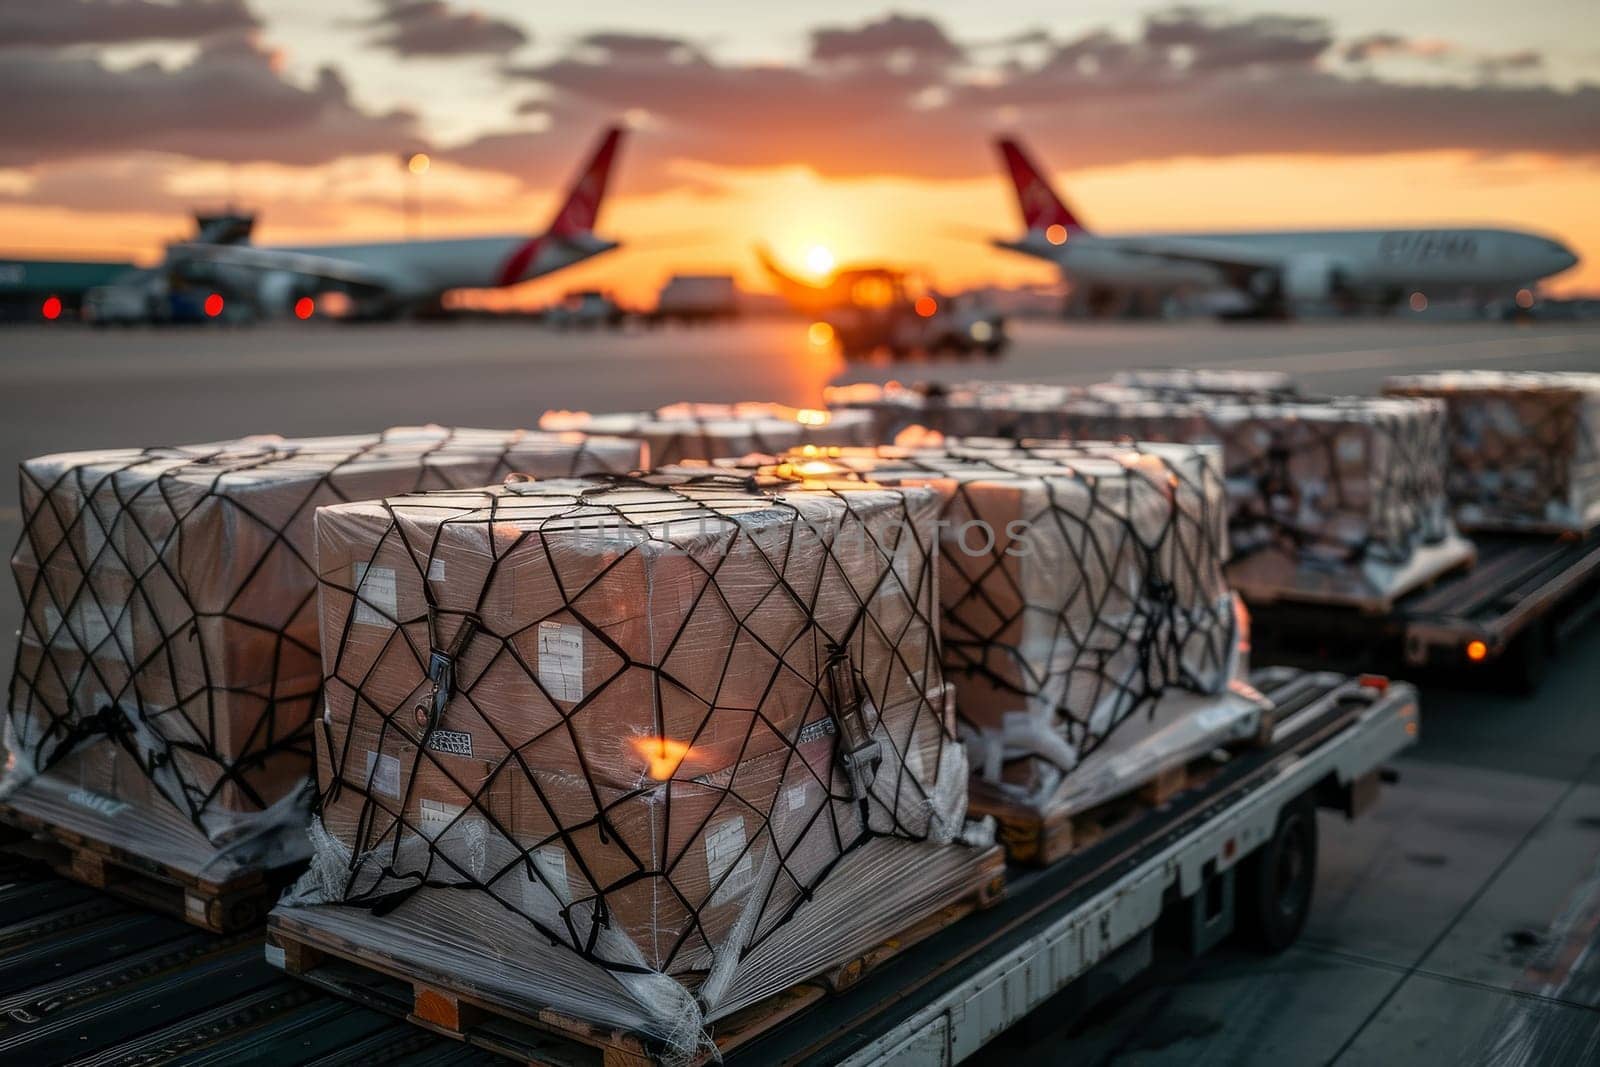 A plane is parked at an airport with a sunset in the background. The plane is a red and white one. There are several boxes on a cart, and they are being loaded onto the plane